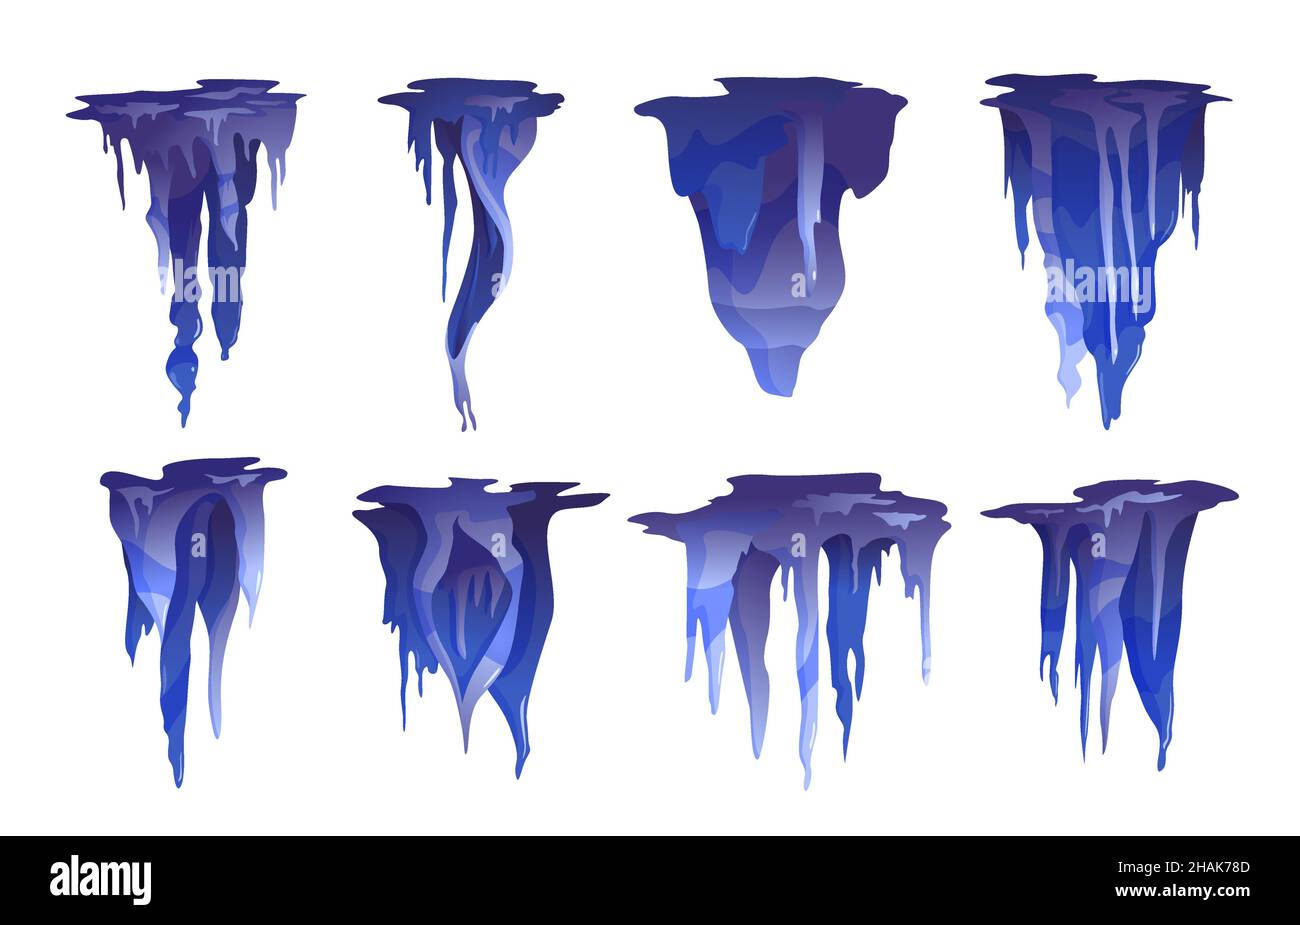 Stalactite icicle shaped hanging from caves ceilings mineral formations varieties cobalt blue realistic set isolated vector illustration Stock Vector